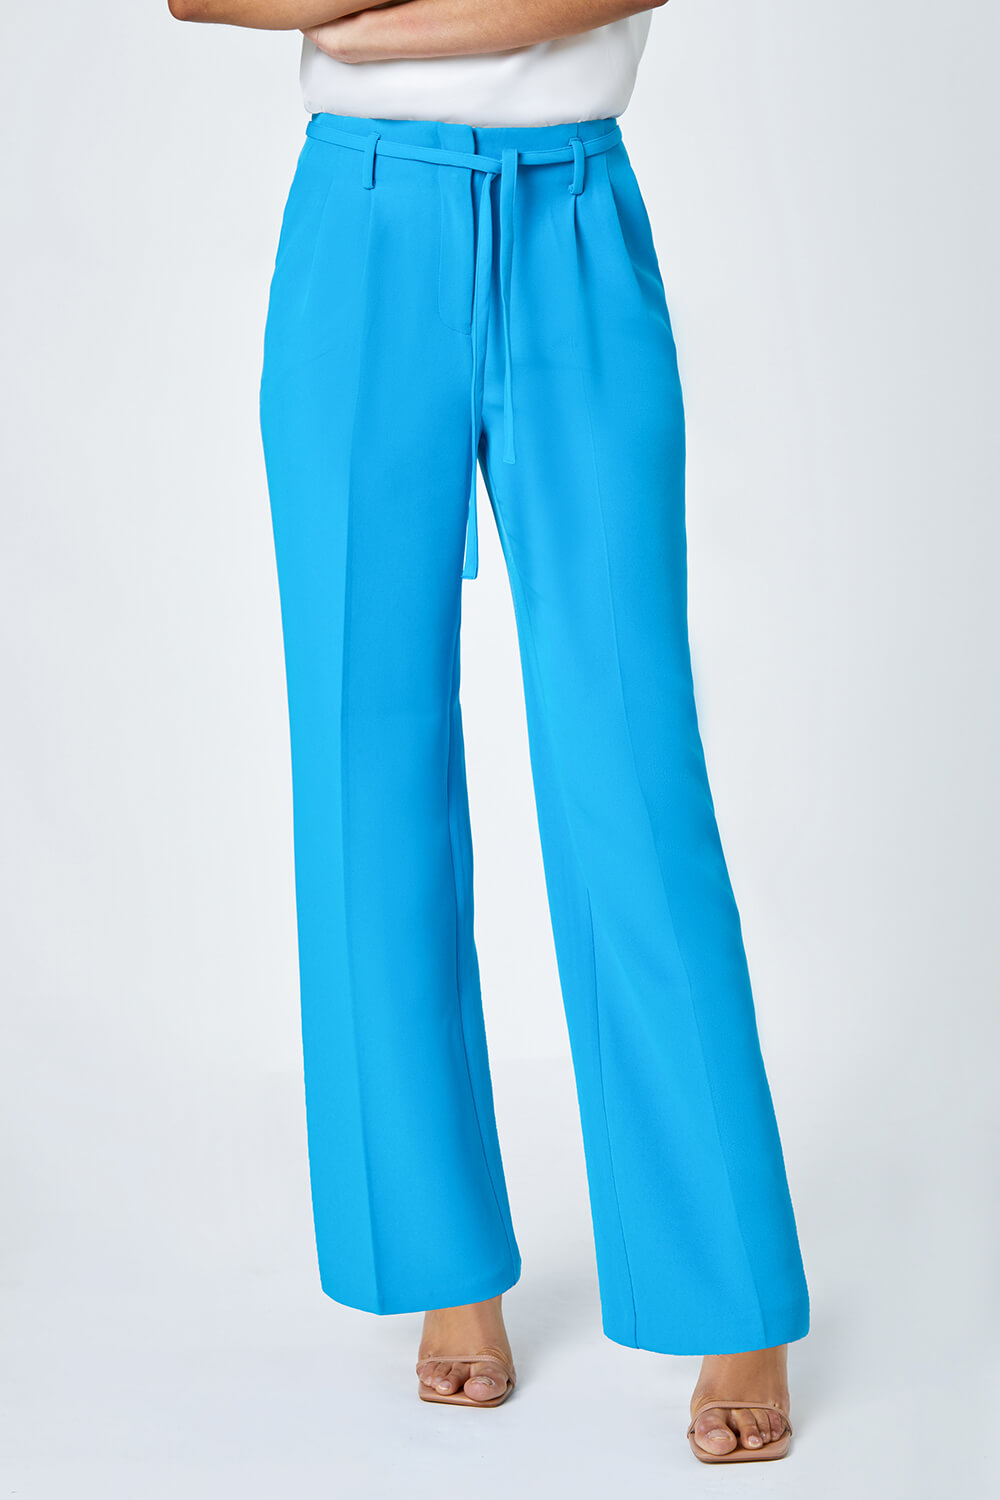 Turquoise Crepe Stretch Straight Leg Trousers, Image 4 of 5